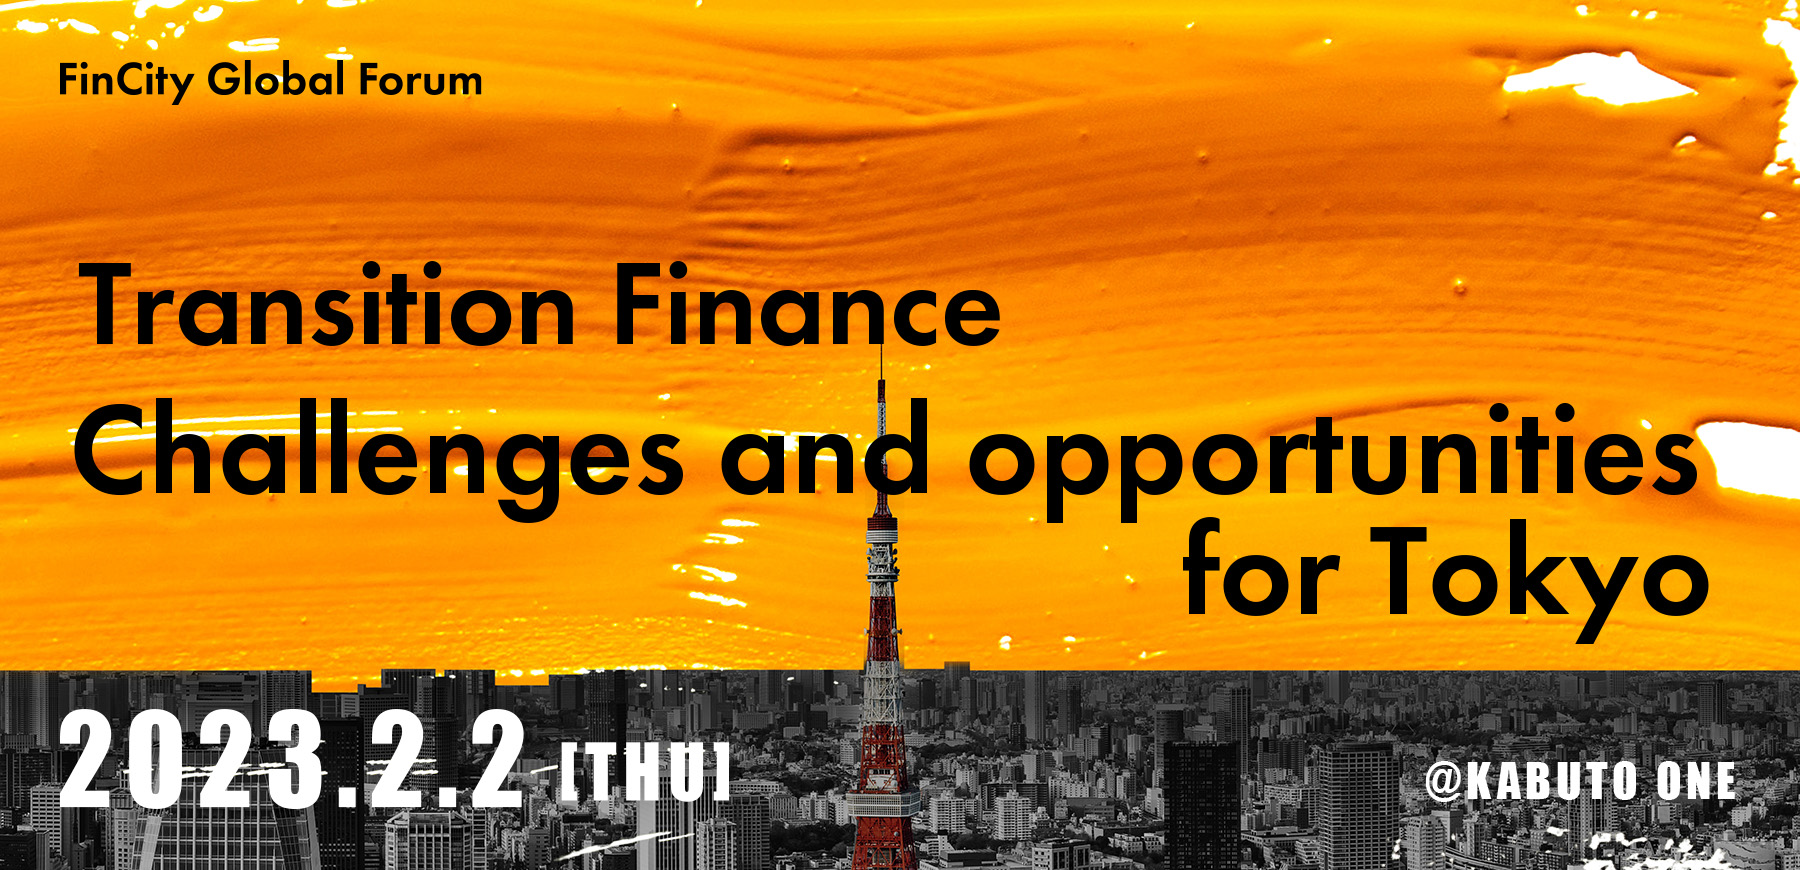 FinCity Global Forum～TransitionFinance Challenges and opportunities for Tokyo 2023.2.2(Thu) @KABUTO ONE